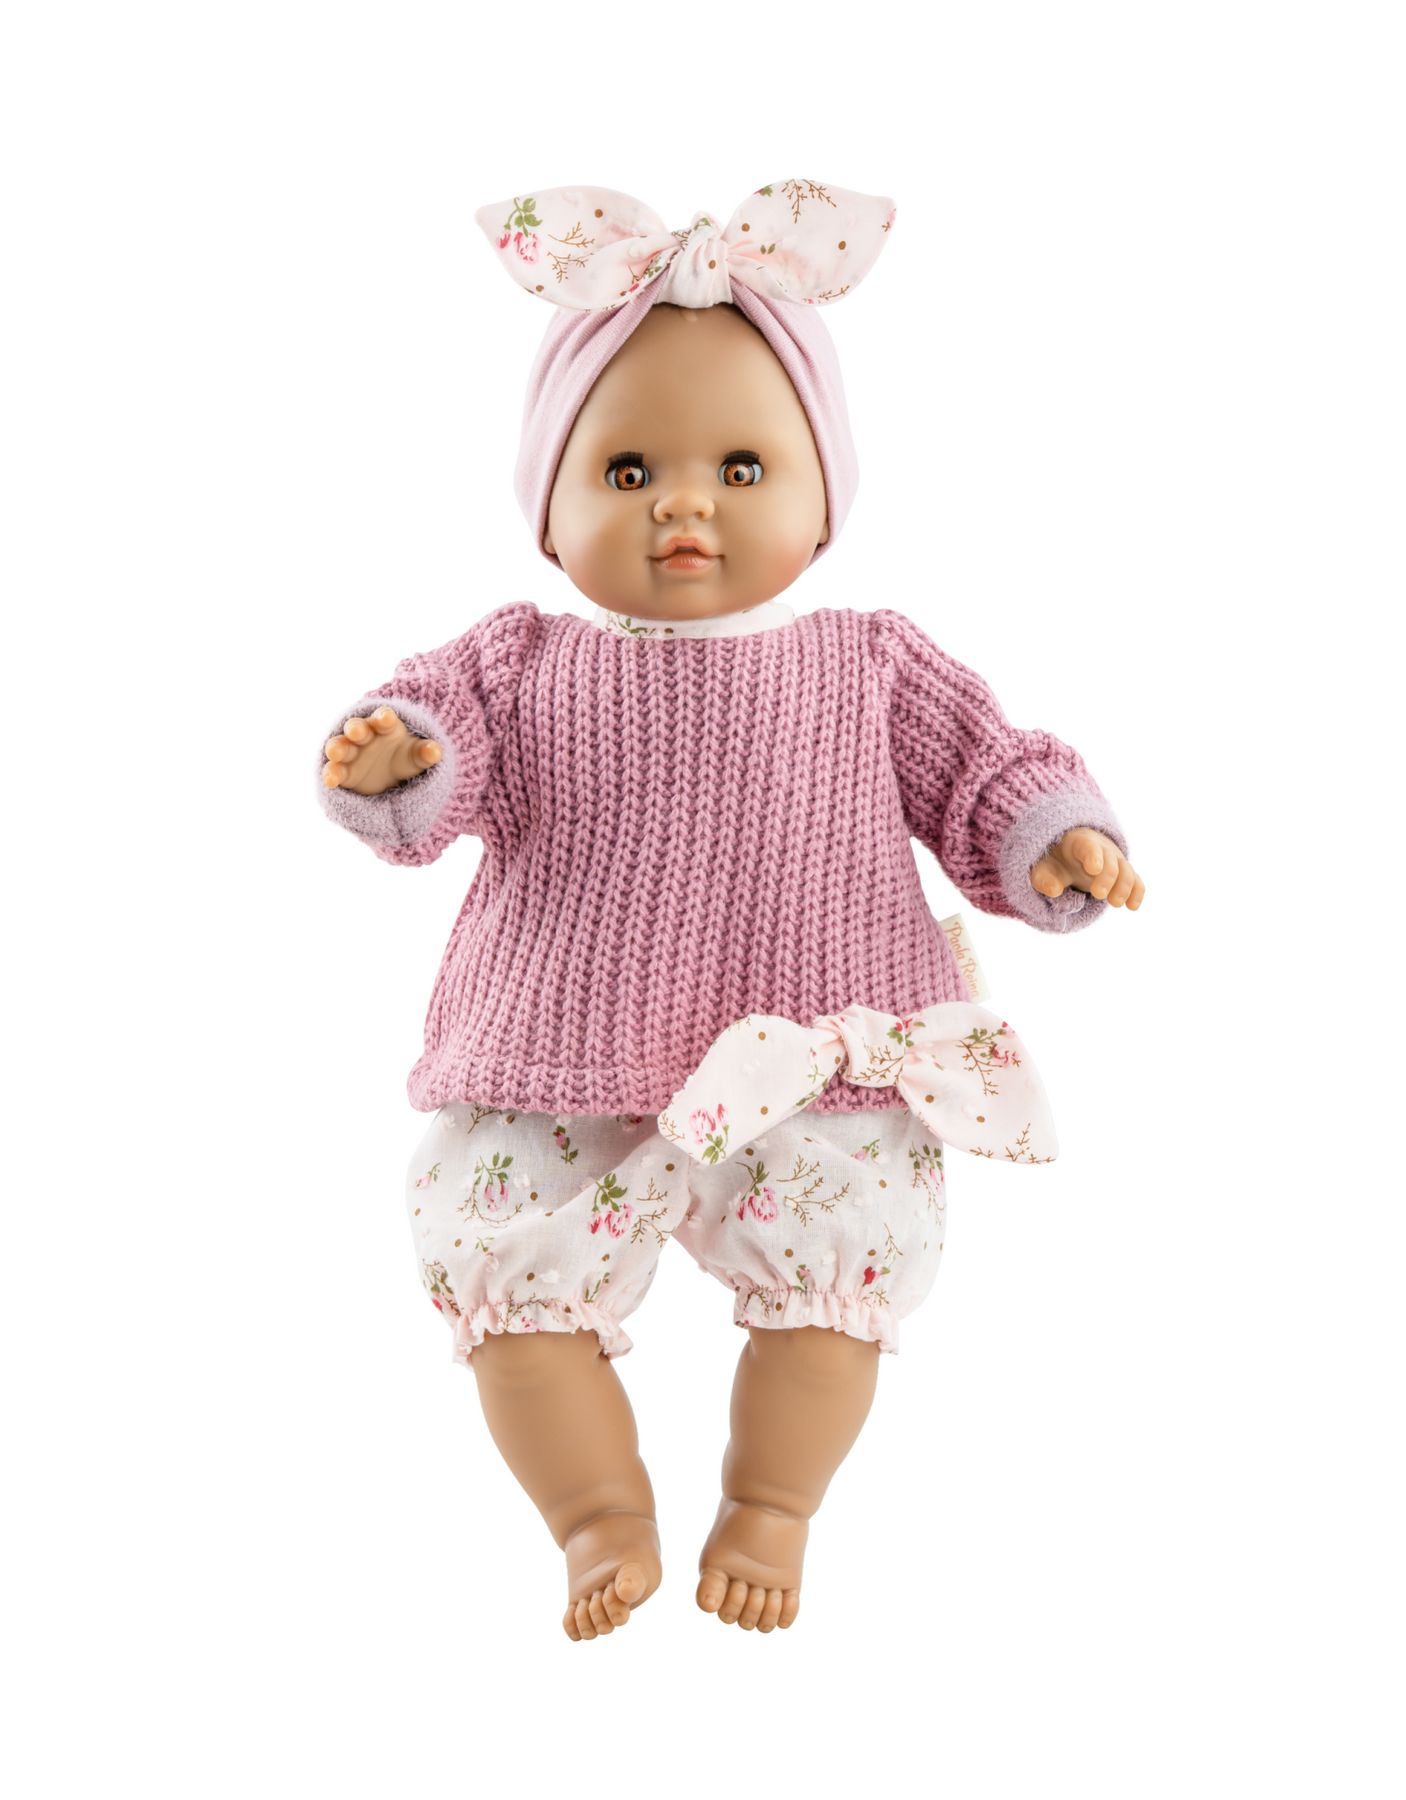 Paola Reina Alberta soft doll with sleepy brown eyes and complete outfit in gift box